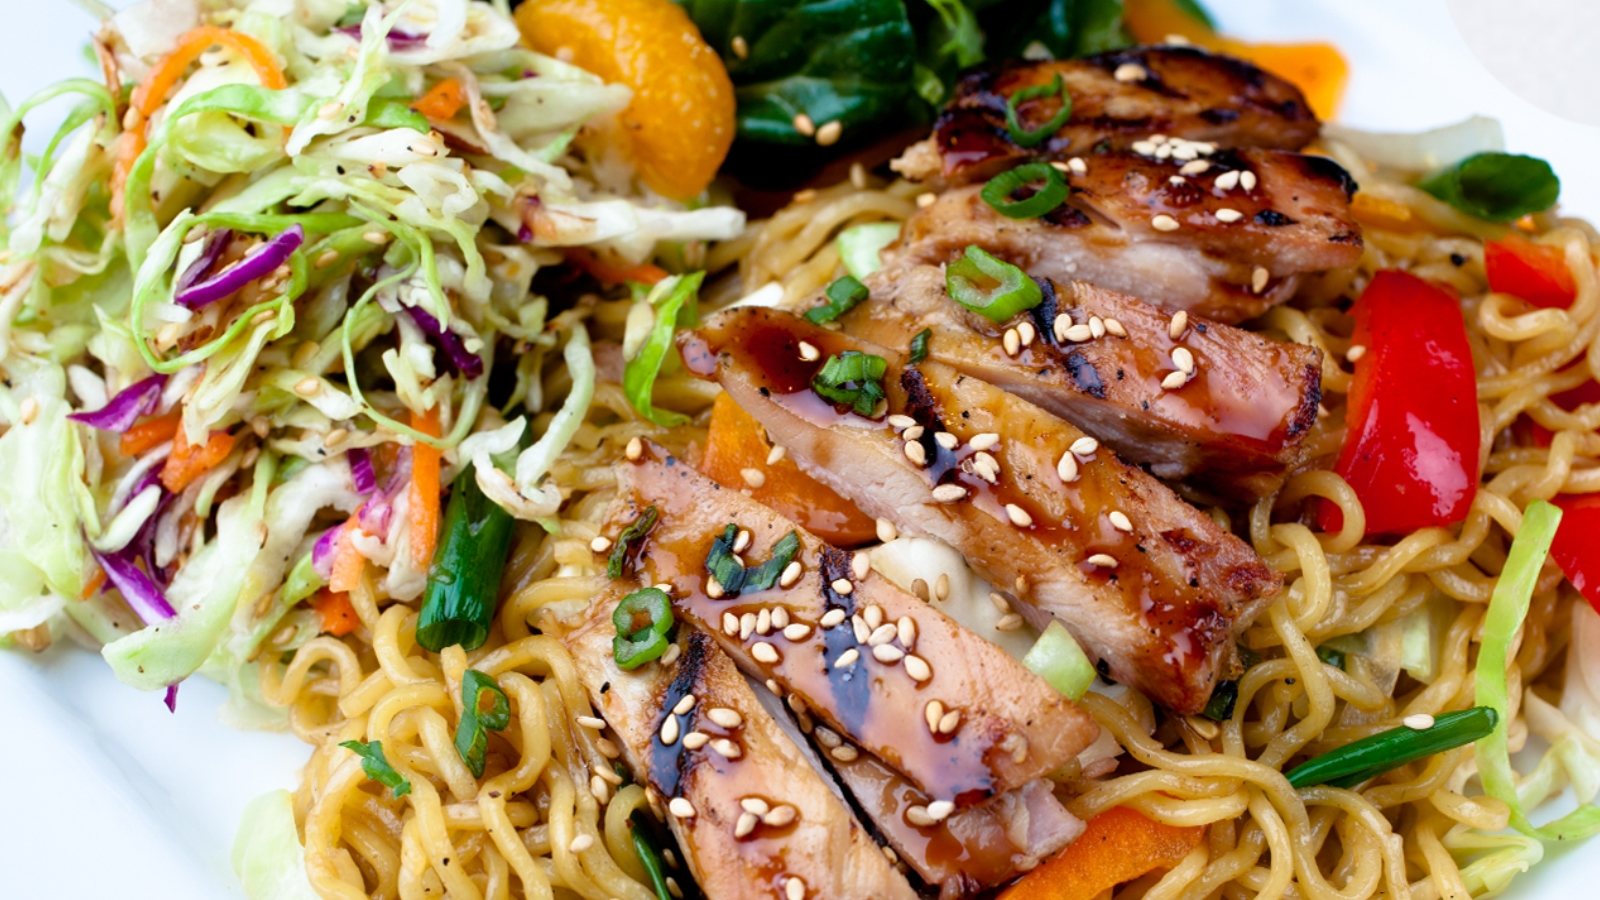 Yakisoba Noodle & Chicken Plate